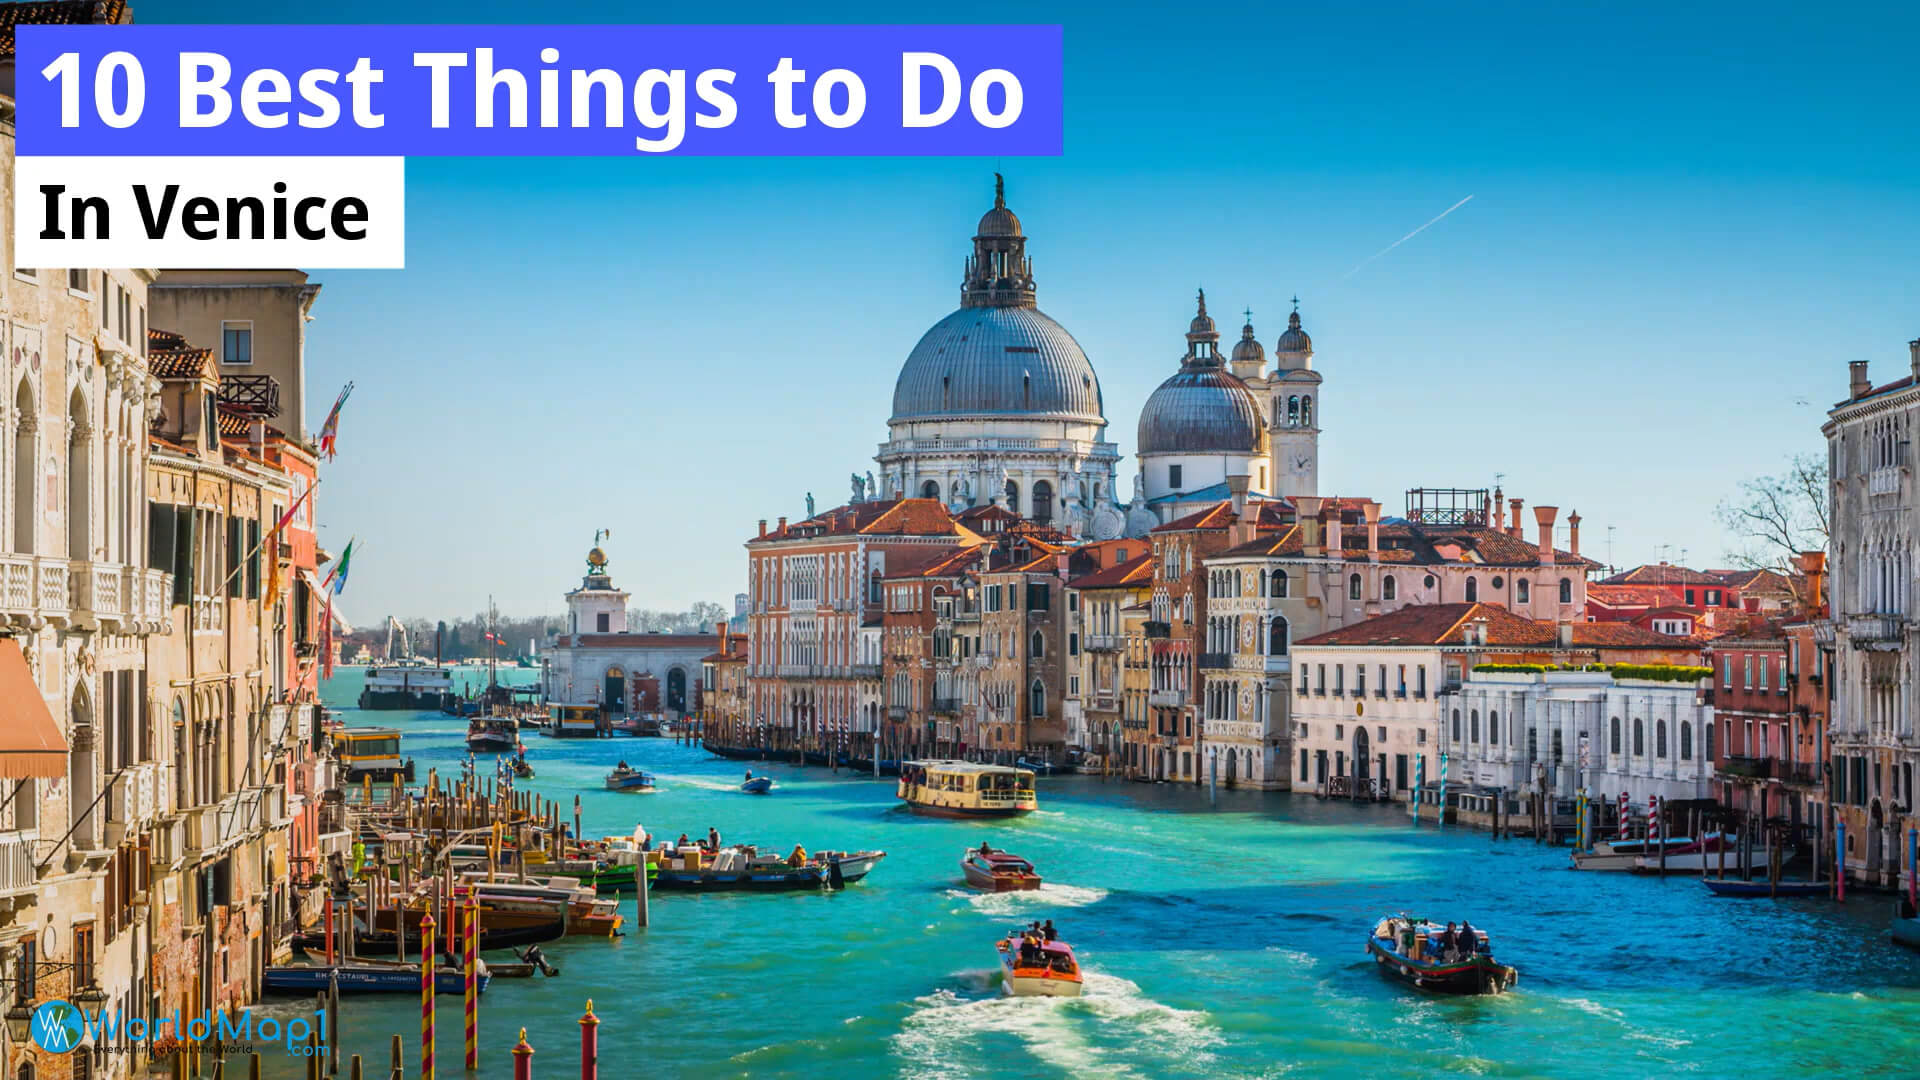 10 Best Things to Do in Venice